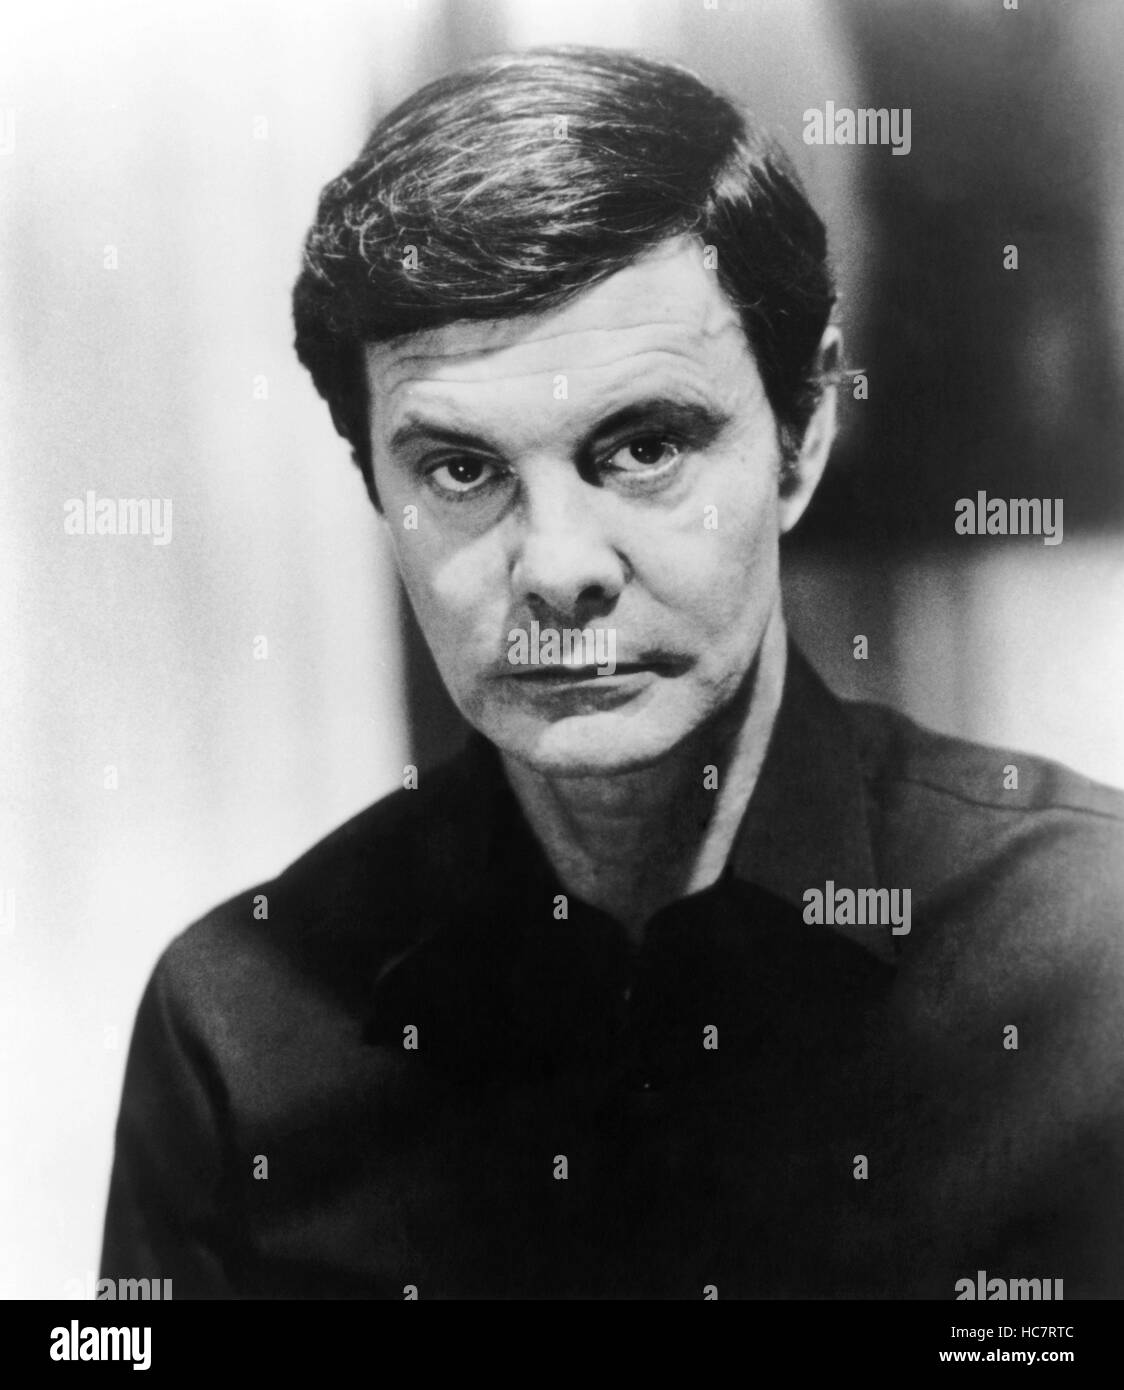 SWAMP THING, Louis Jourdan, 1982, ©Embassy Pictures / courtesy Everett ...